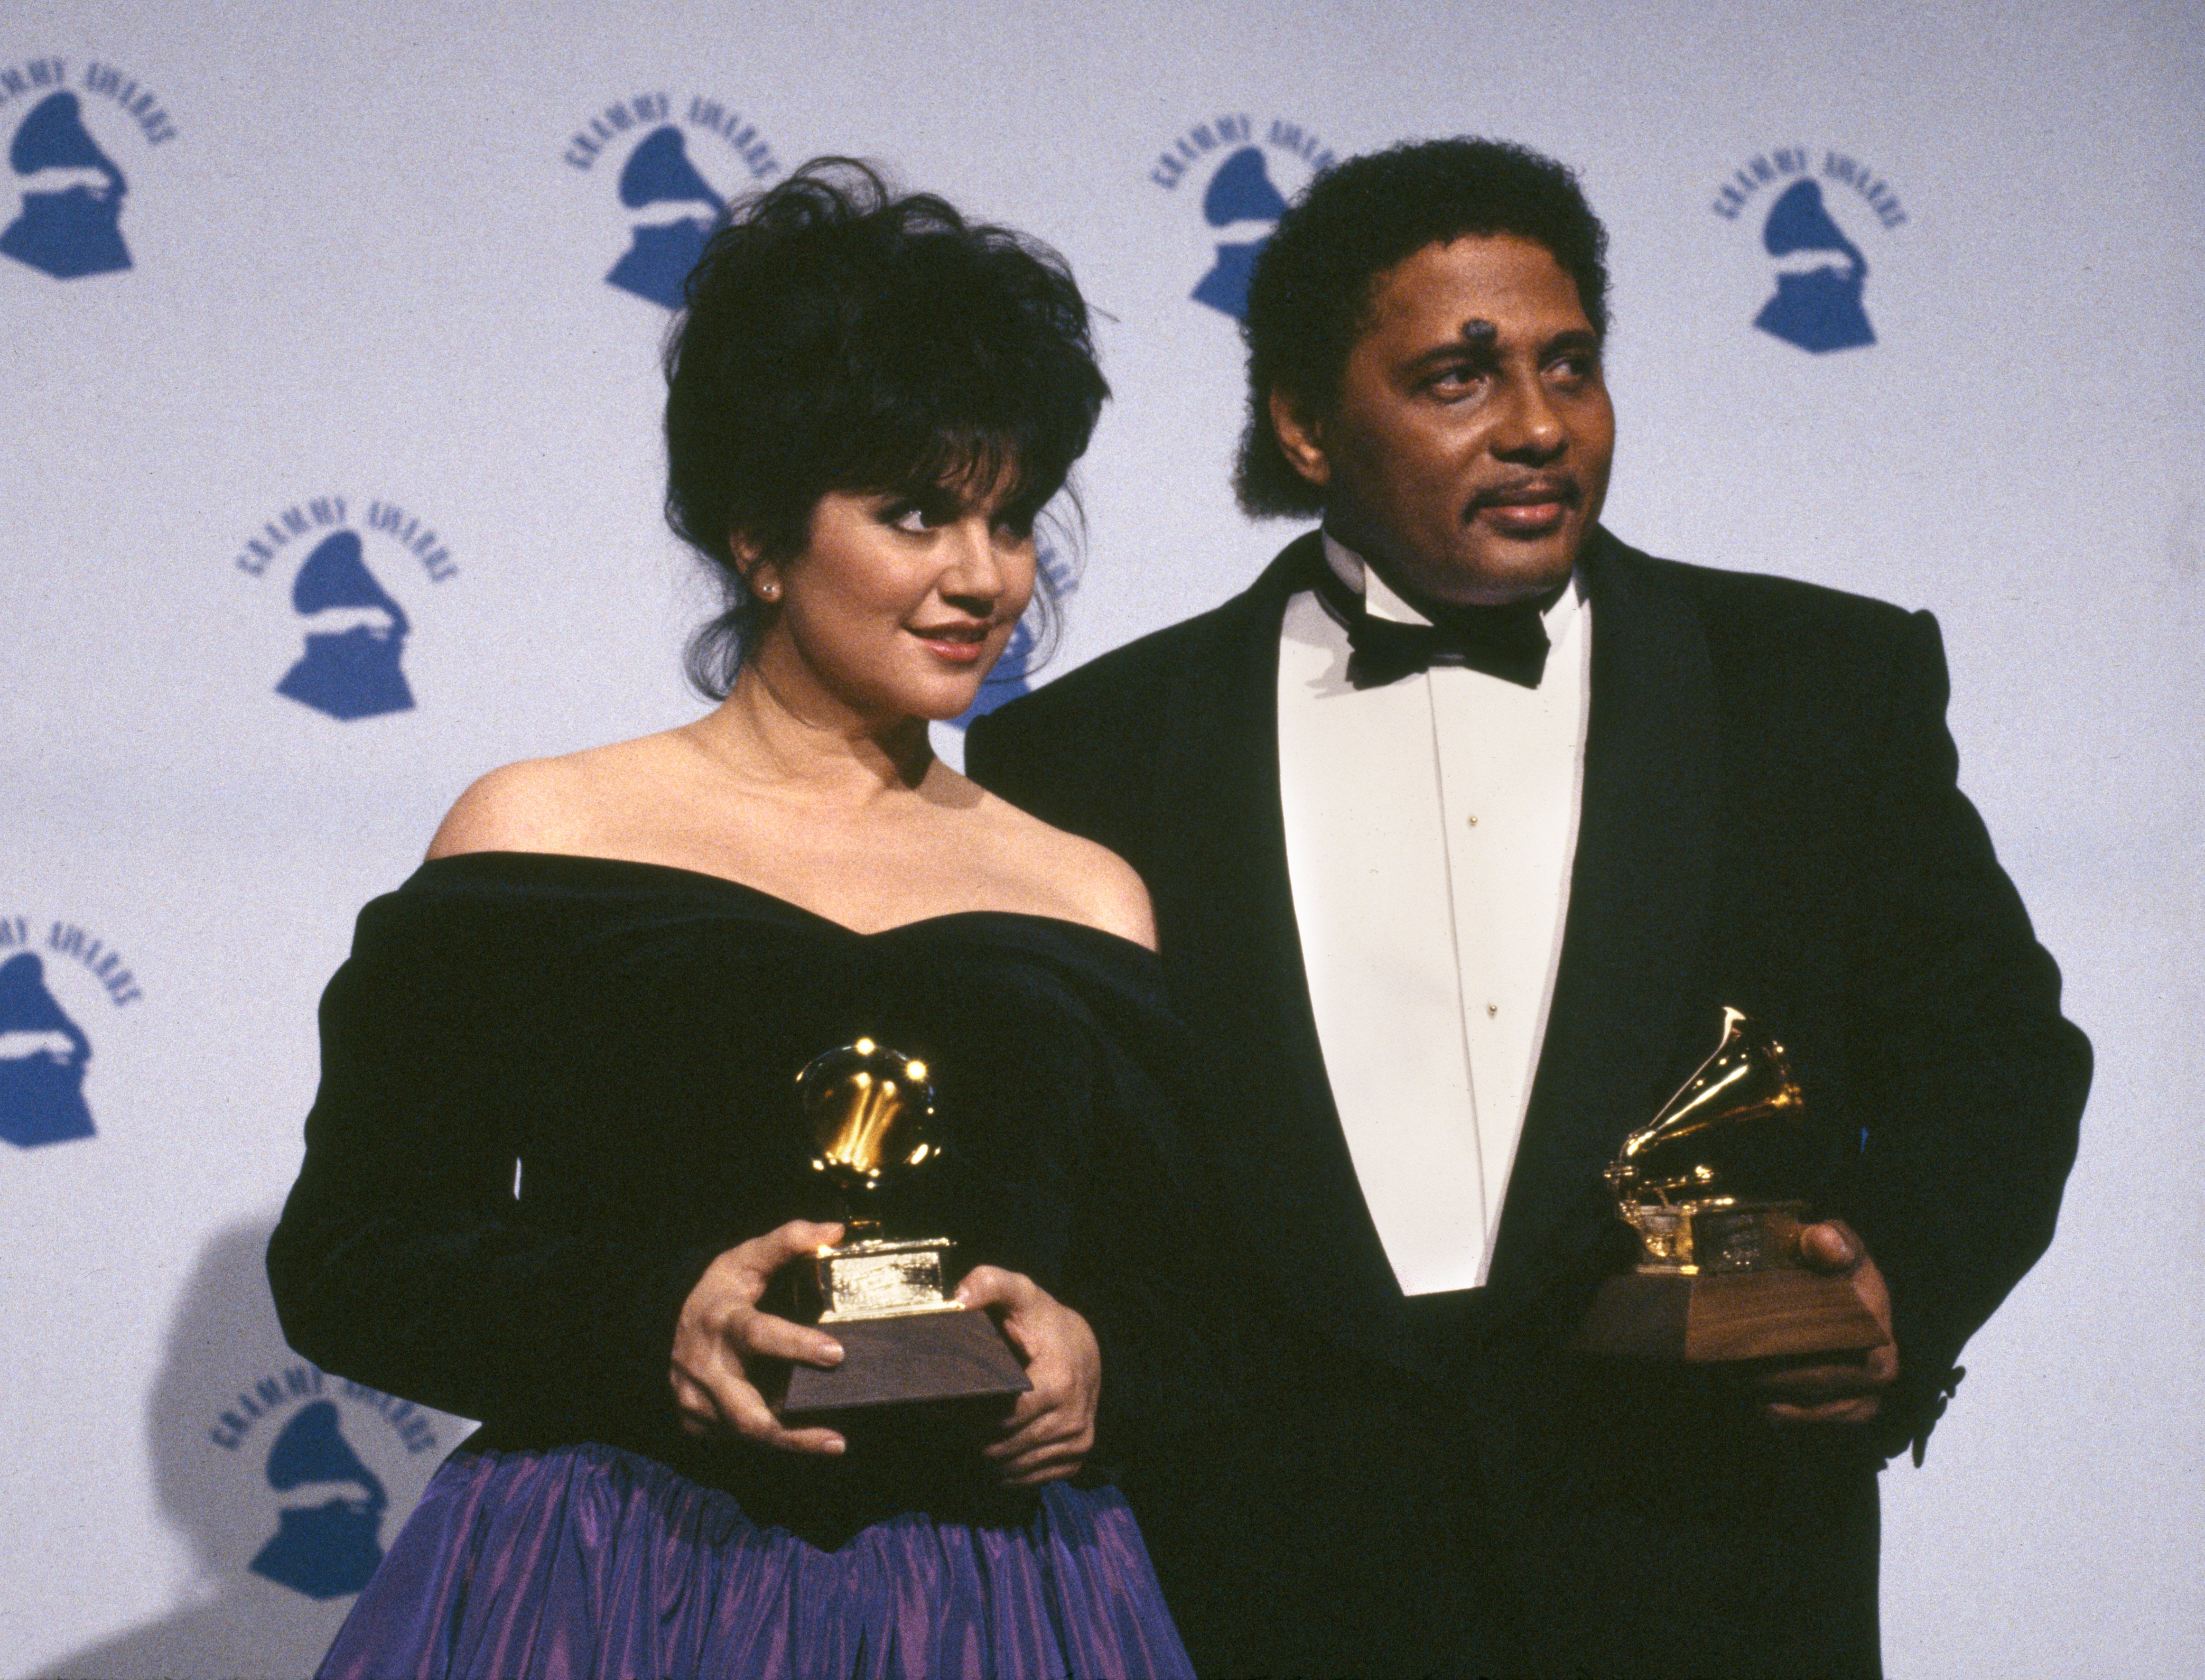 Linda Ronstadt and Aaron Neville at the 32nd Annual Grammy Awards on February 21, 1990 |  Source: Getty Images